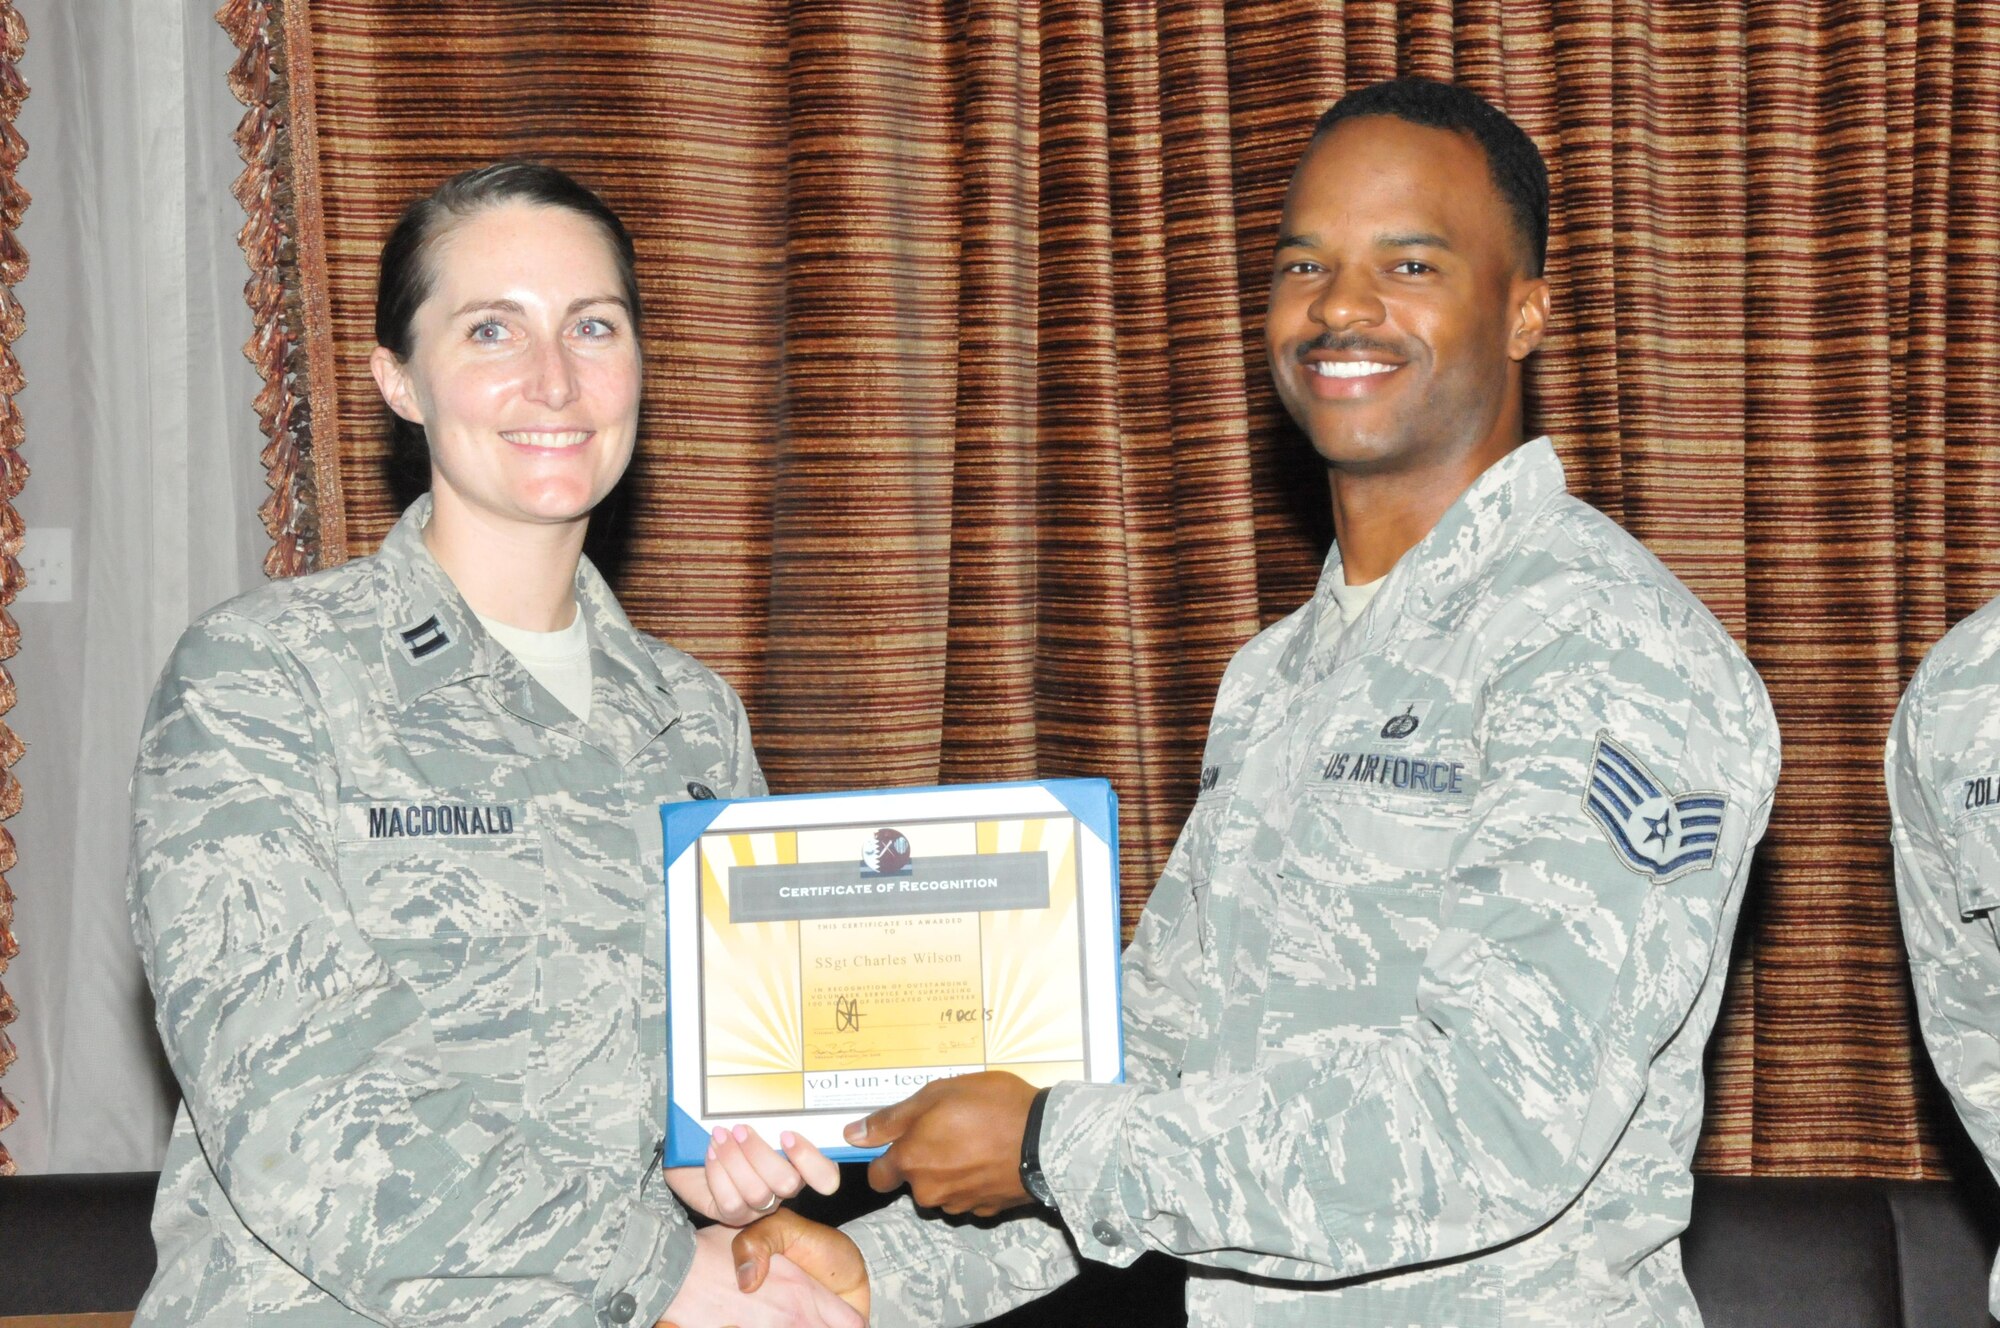 Staff Sgt. Charles Wilson, 379th Expeditionary Construction Squadron contracting officer, receives his certificate of recognition Dec. 29 at Al Udeid Air Base, Qatar. Wilson was recognized as a Presidential Volunteer Service Award winner, for volunteering more than 500 hours in the community. (U.S. Air Force photo by Tech. Sgt. Terrica Y. Jones/Released)